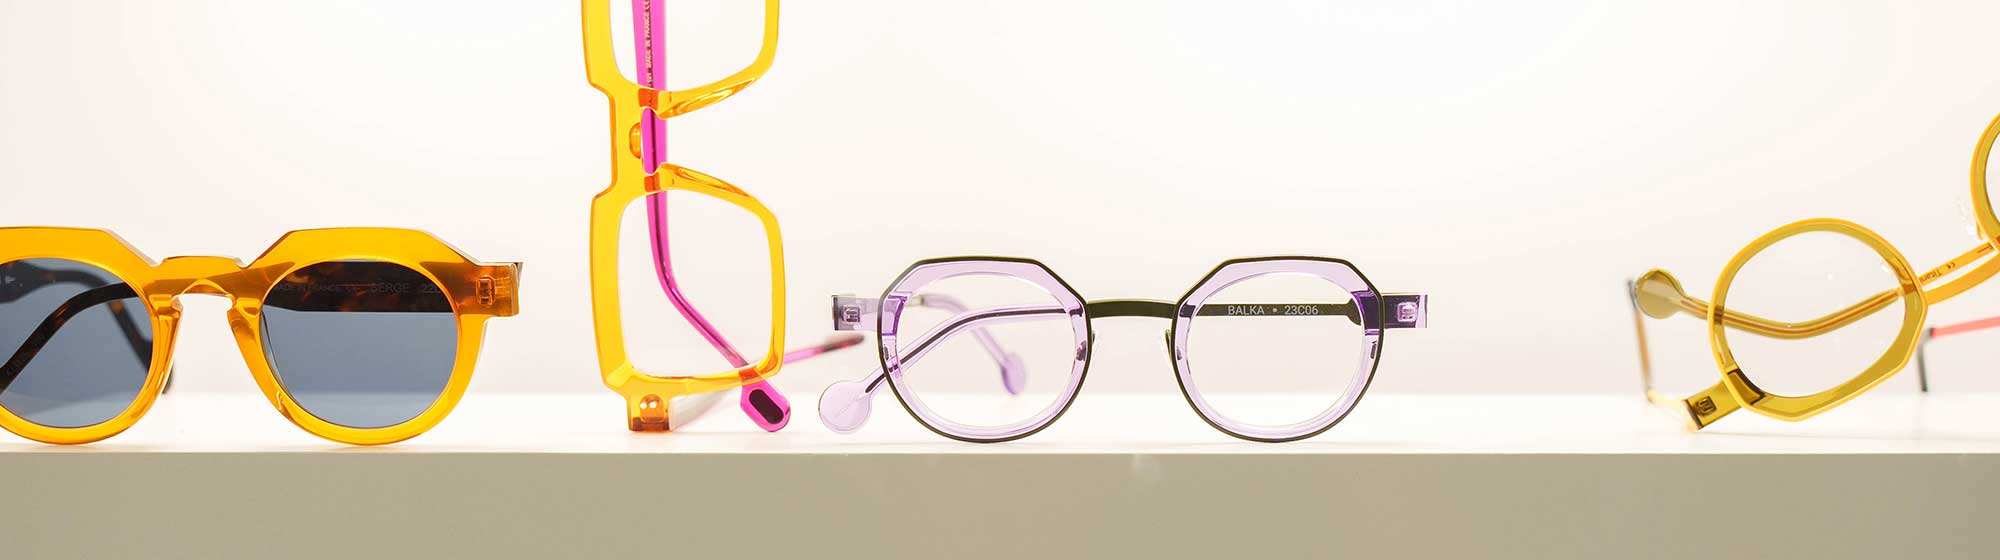 Yellow and purple glasses exhibition